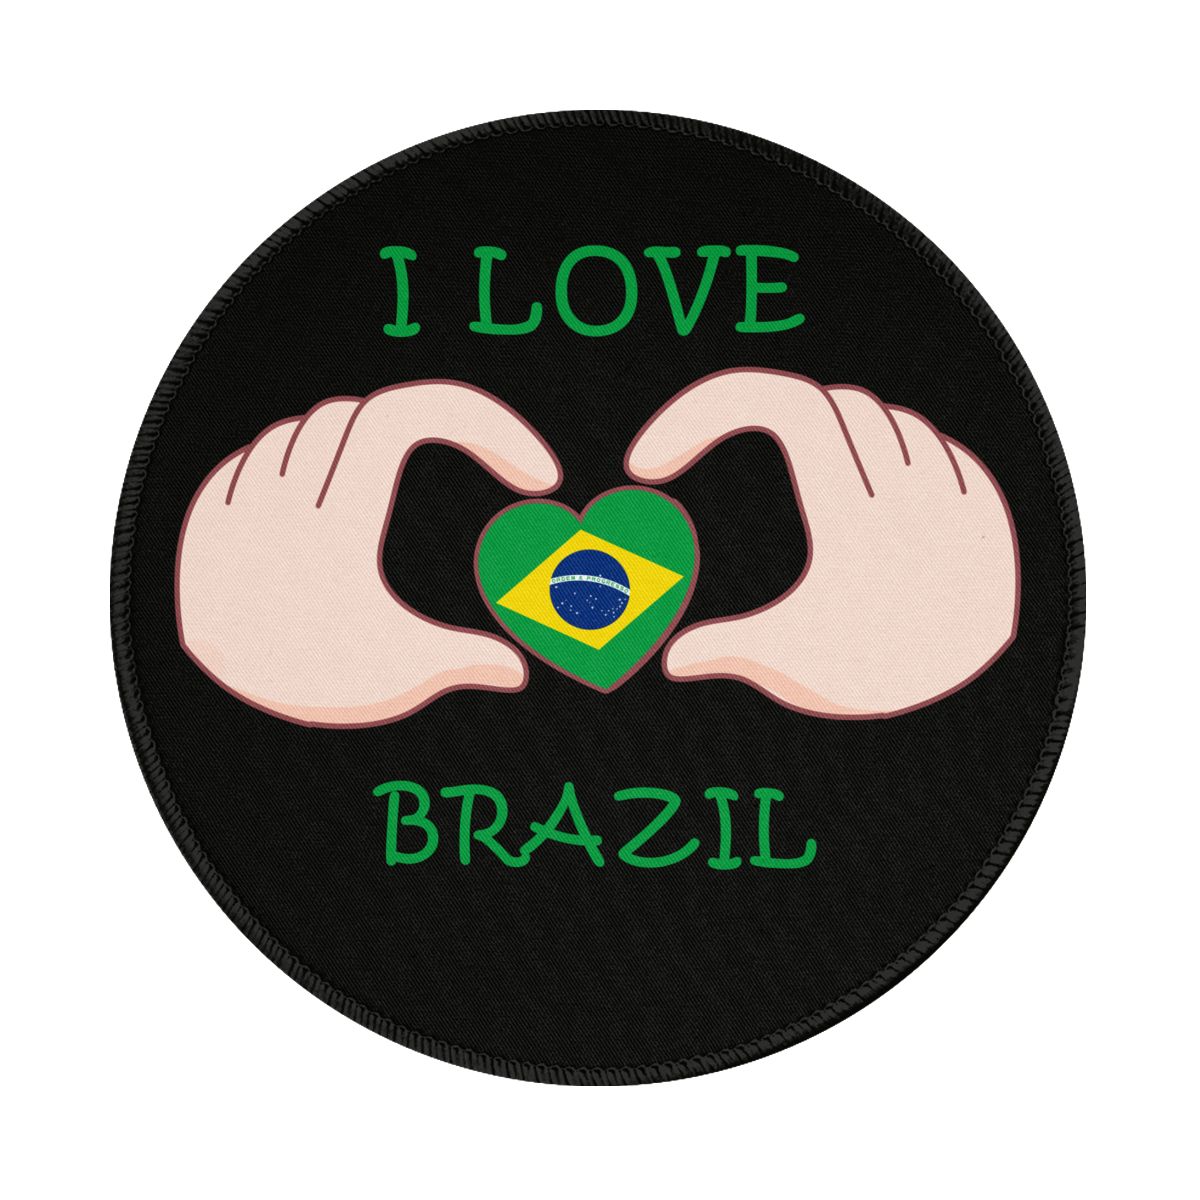 I Love Brazil Waterproof Round Mouse Pad for Wireless Mouse